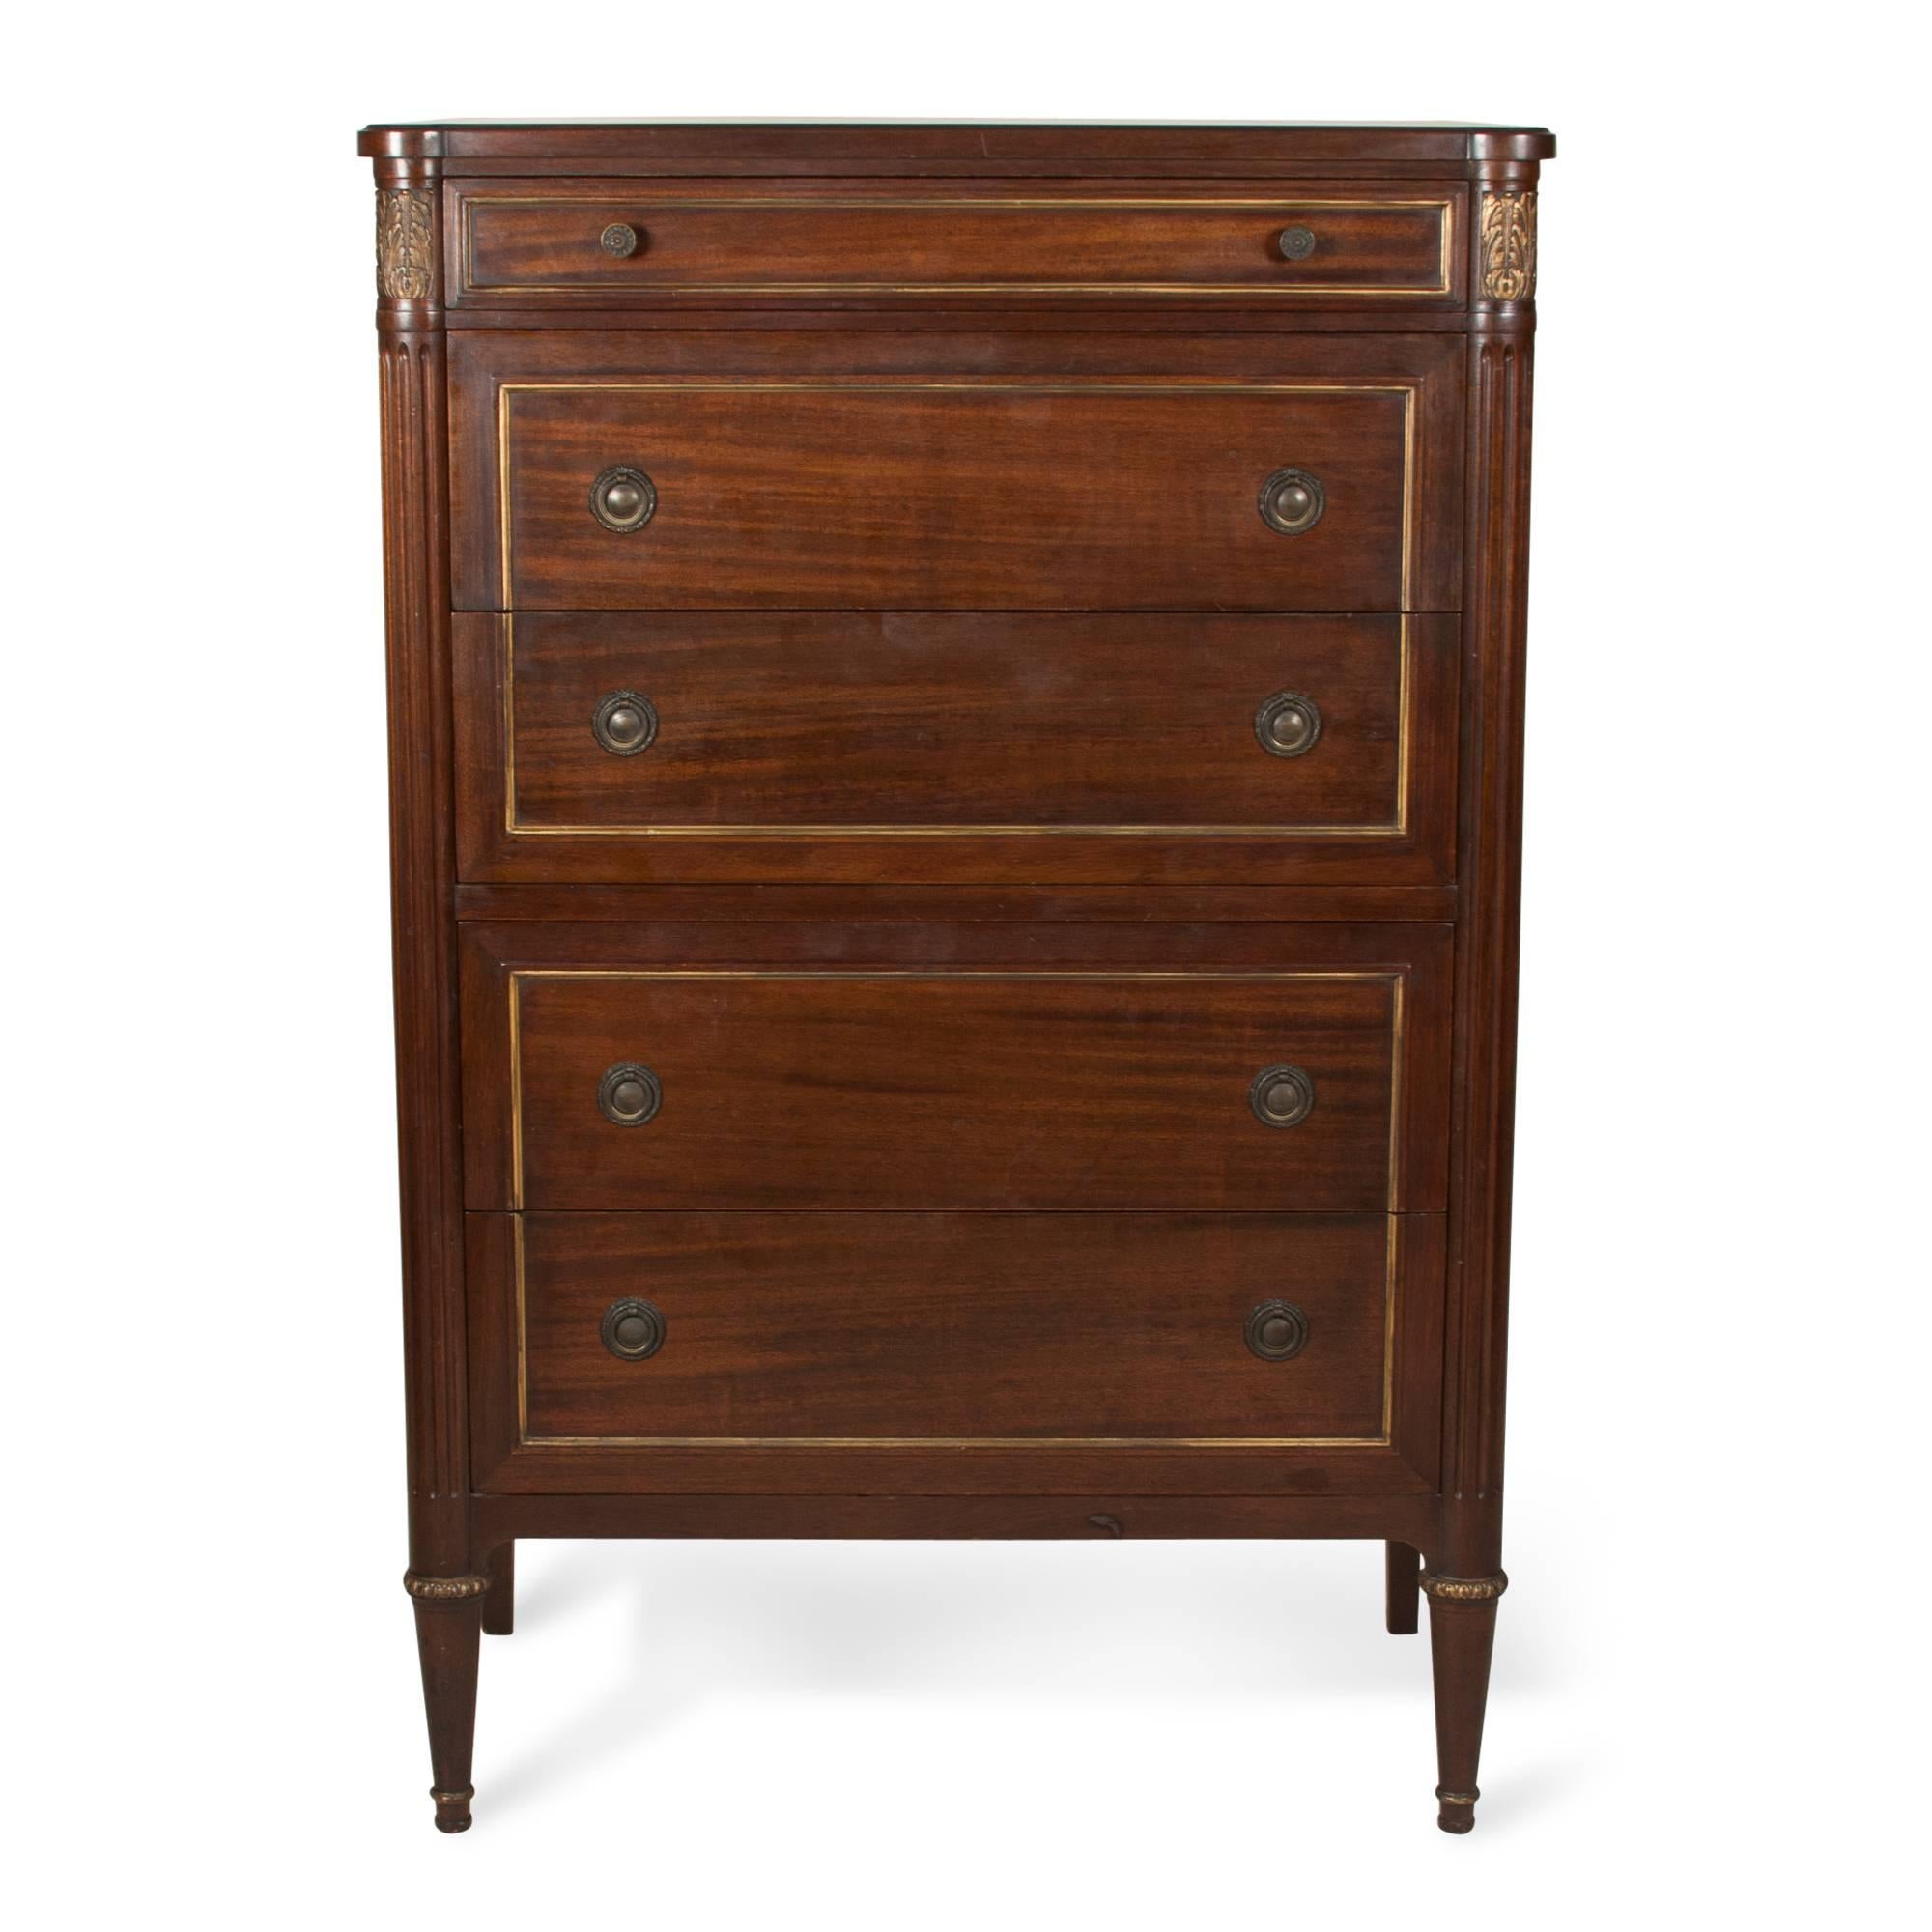 Aesthetic Movement Aesthetic Style Tall Commode